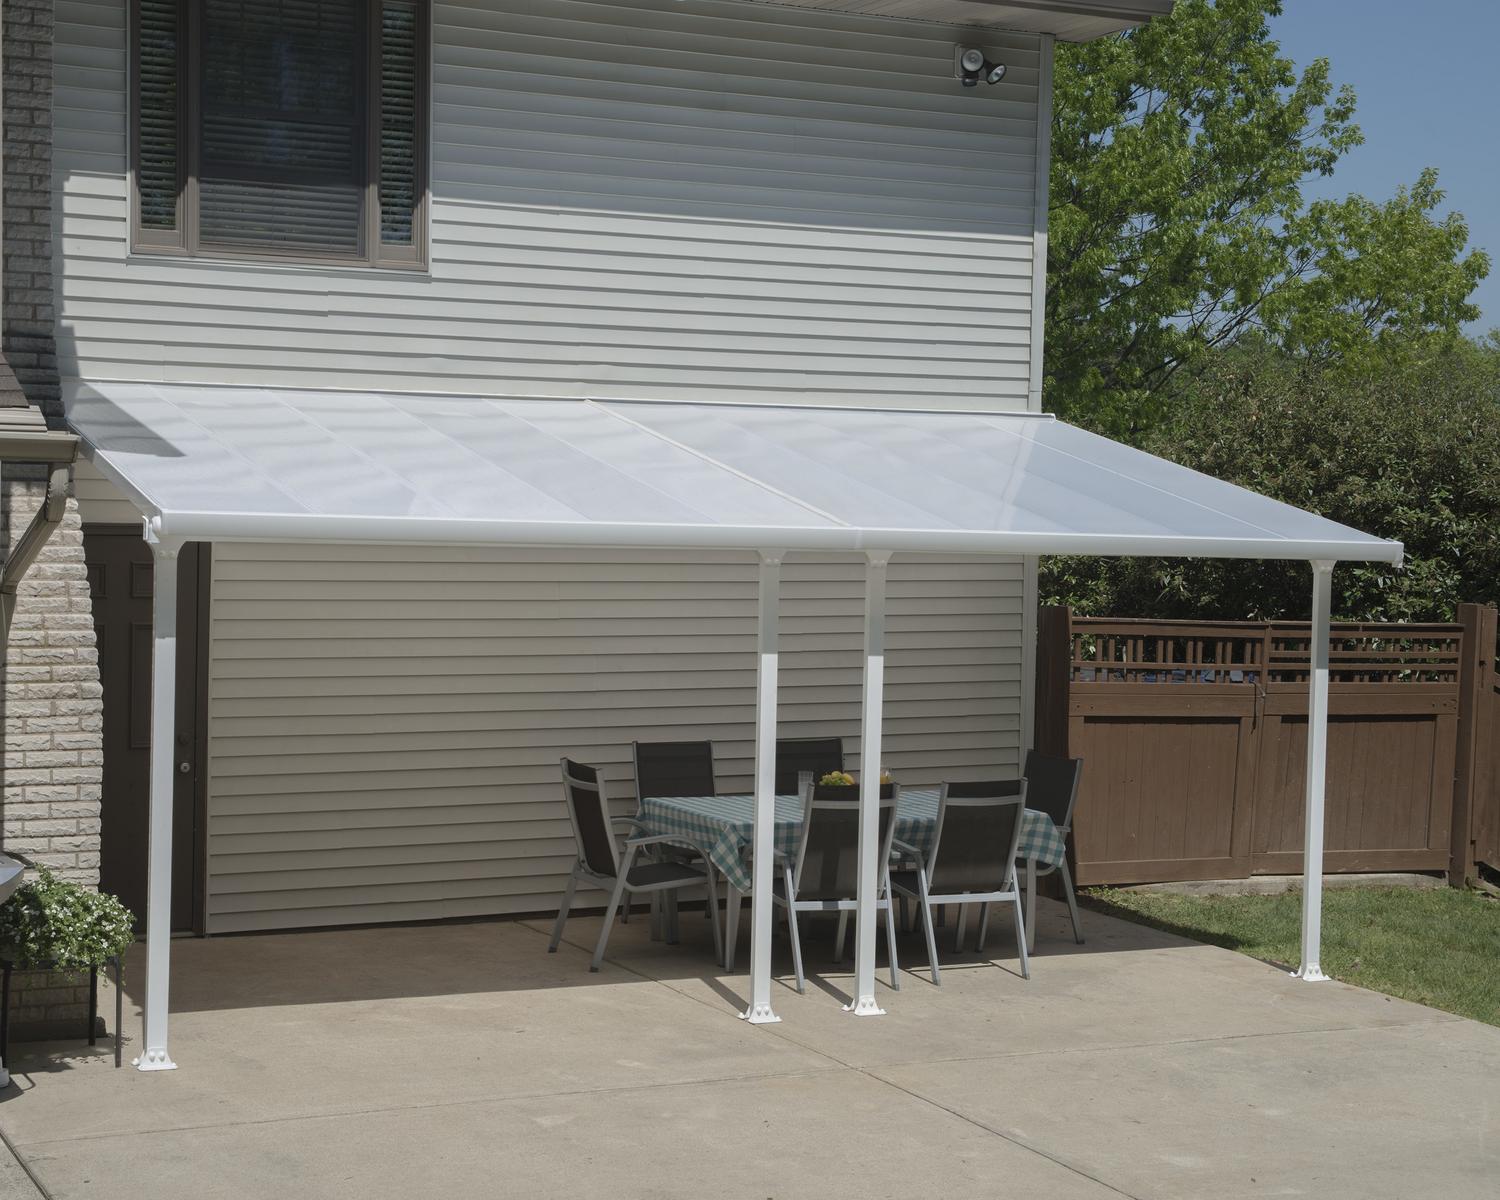 Aluminium White Patio Cover 10 ft. x 20 ft. with polycarbonate roof panels, used to cover outdoor furniture